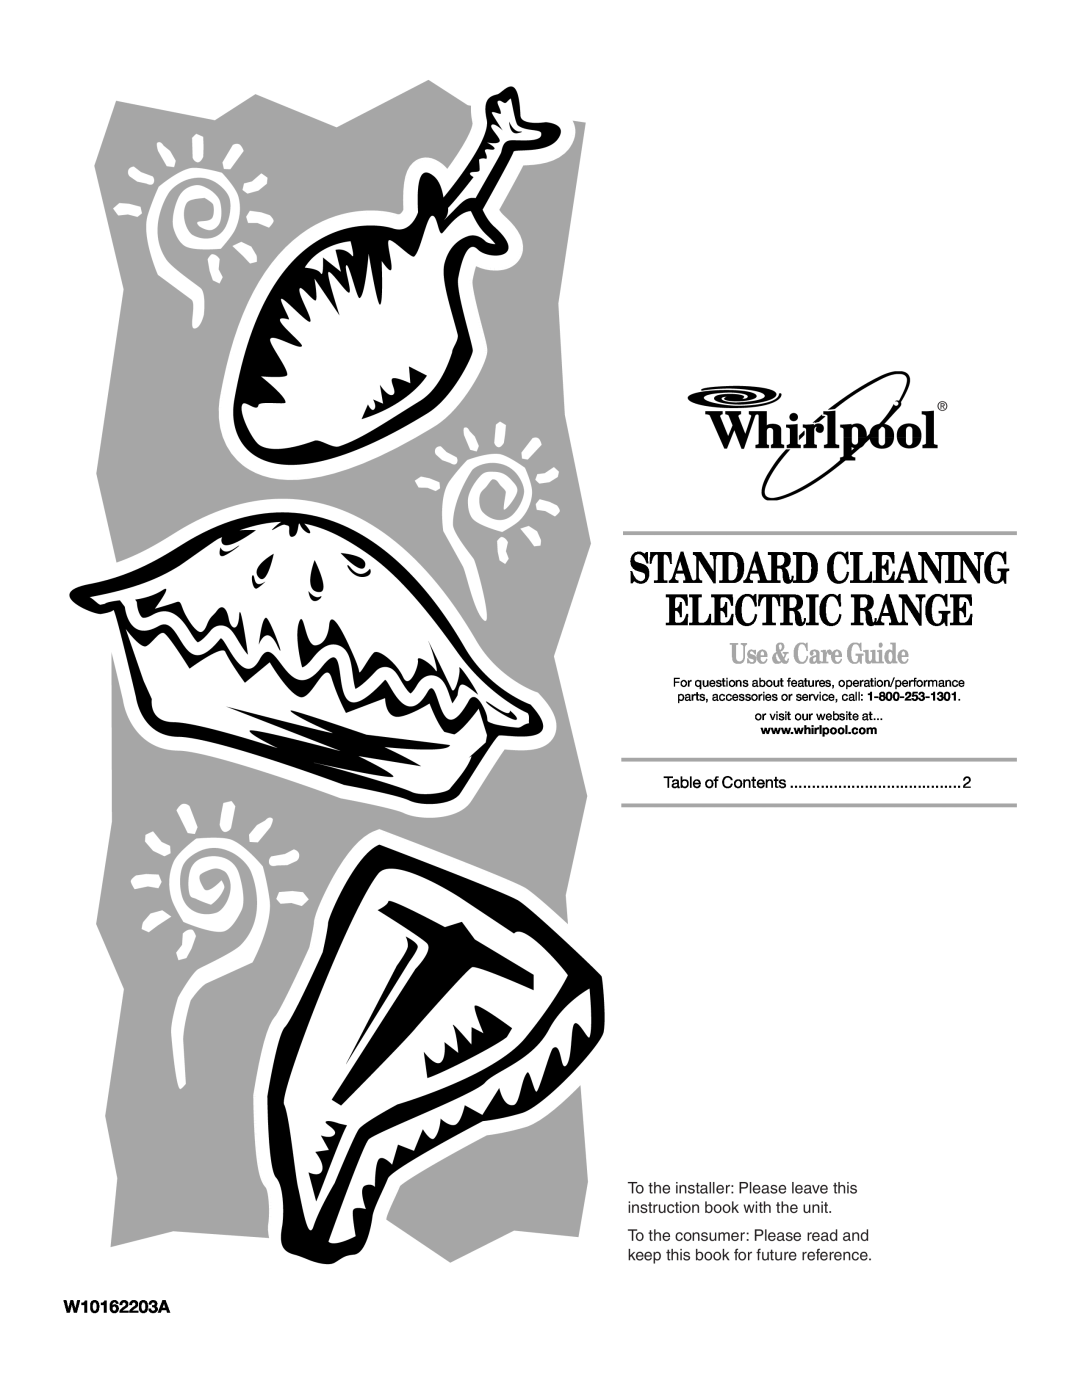 Whirlpool RF110AXS manual W10162203A, Standard Cleaning Electric Range, Use & Care Guide, or visit our website at 